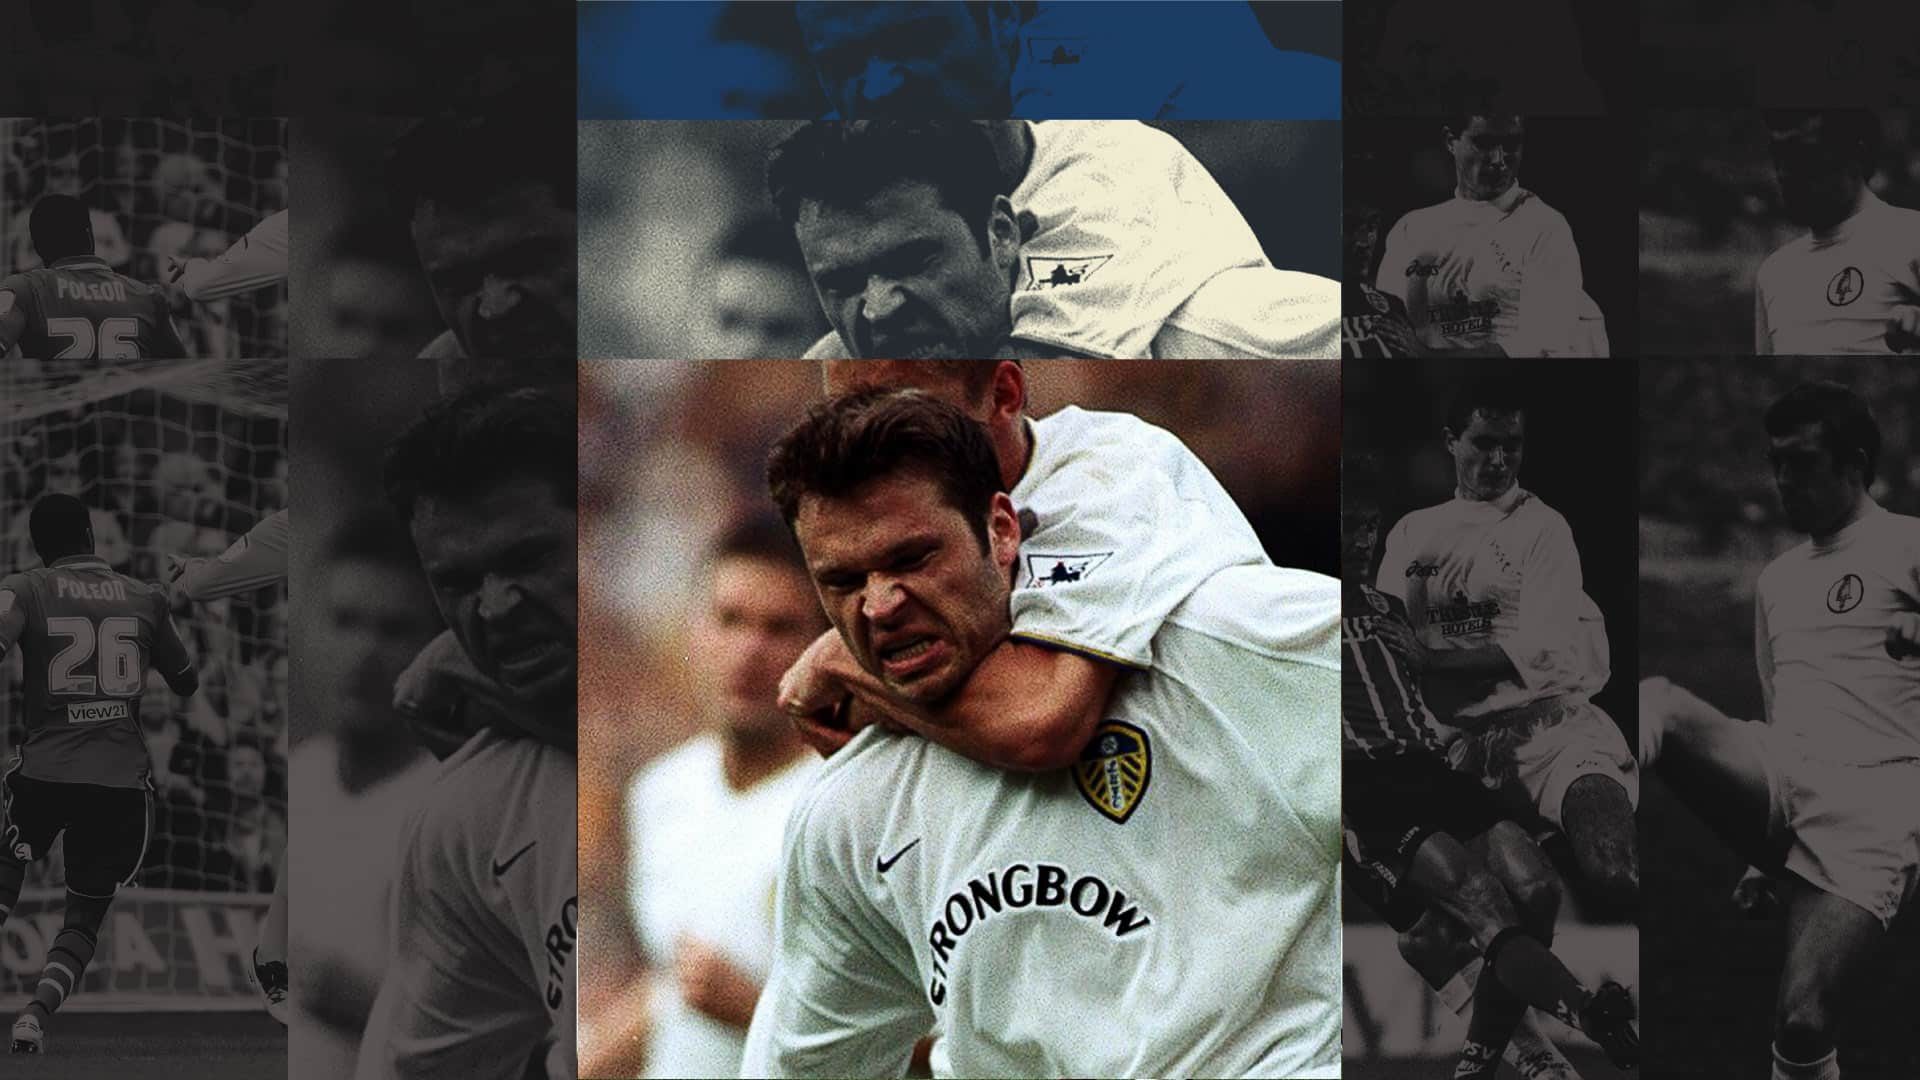 Mark Viduka playing for Leeds in 2000/01. Someone is celebrating a goal with him in a headlock